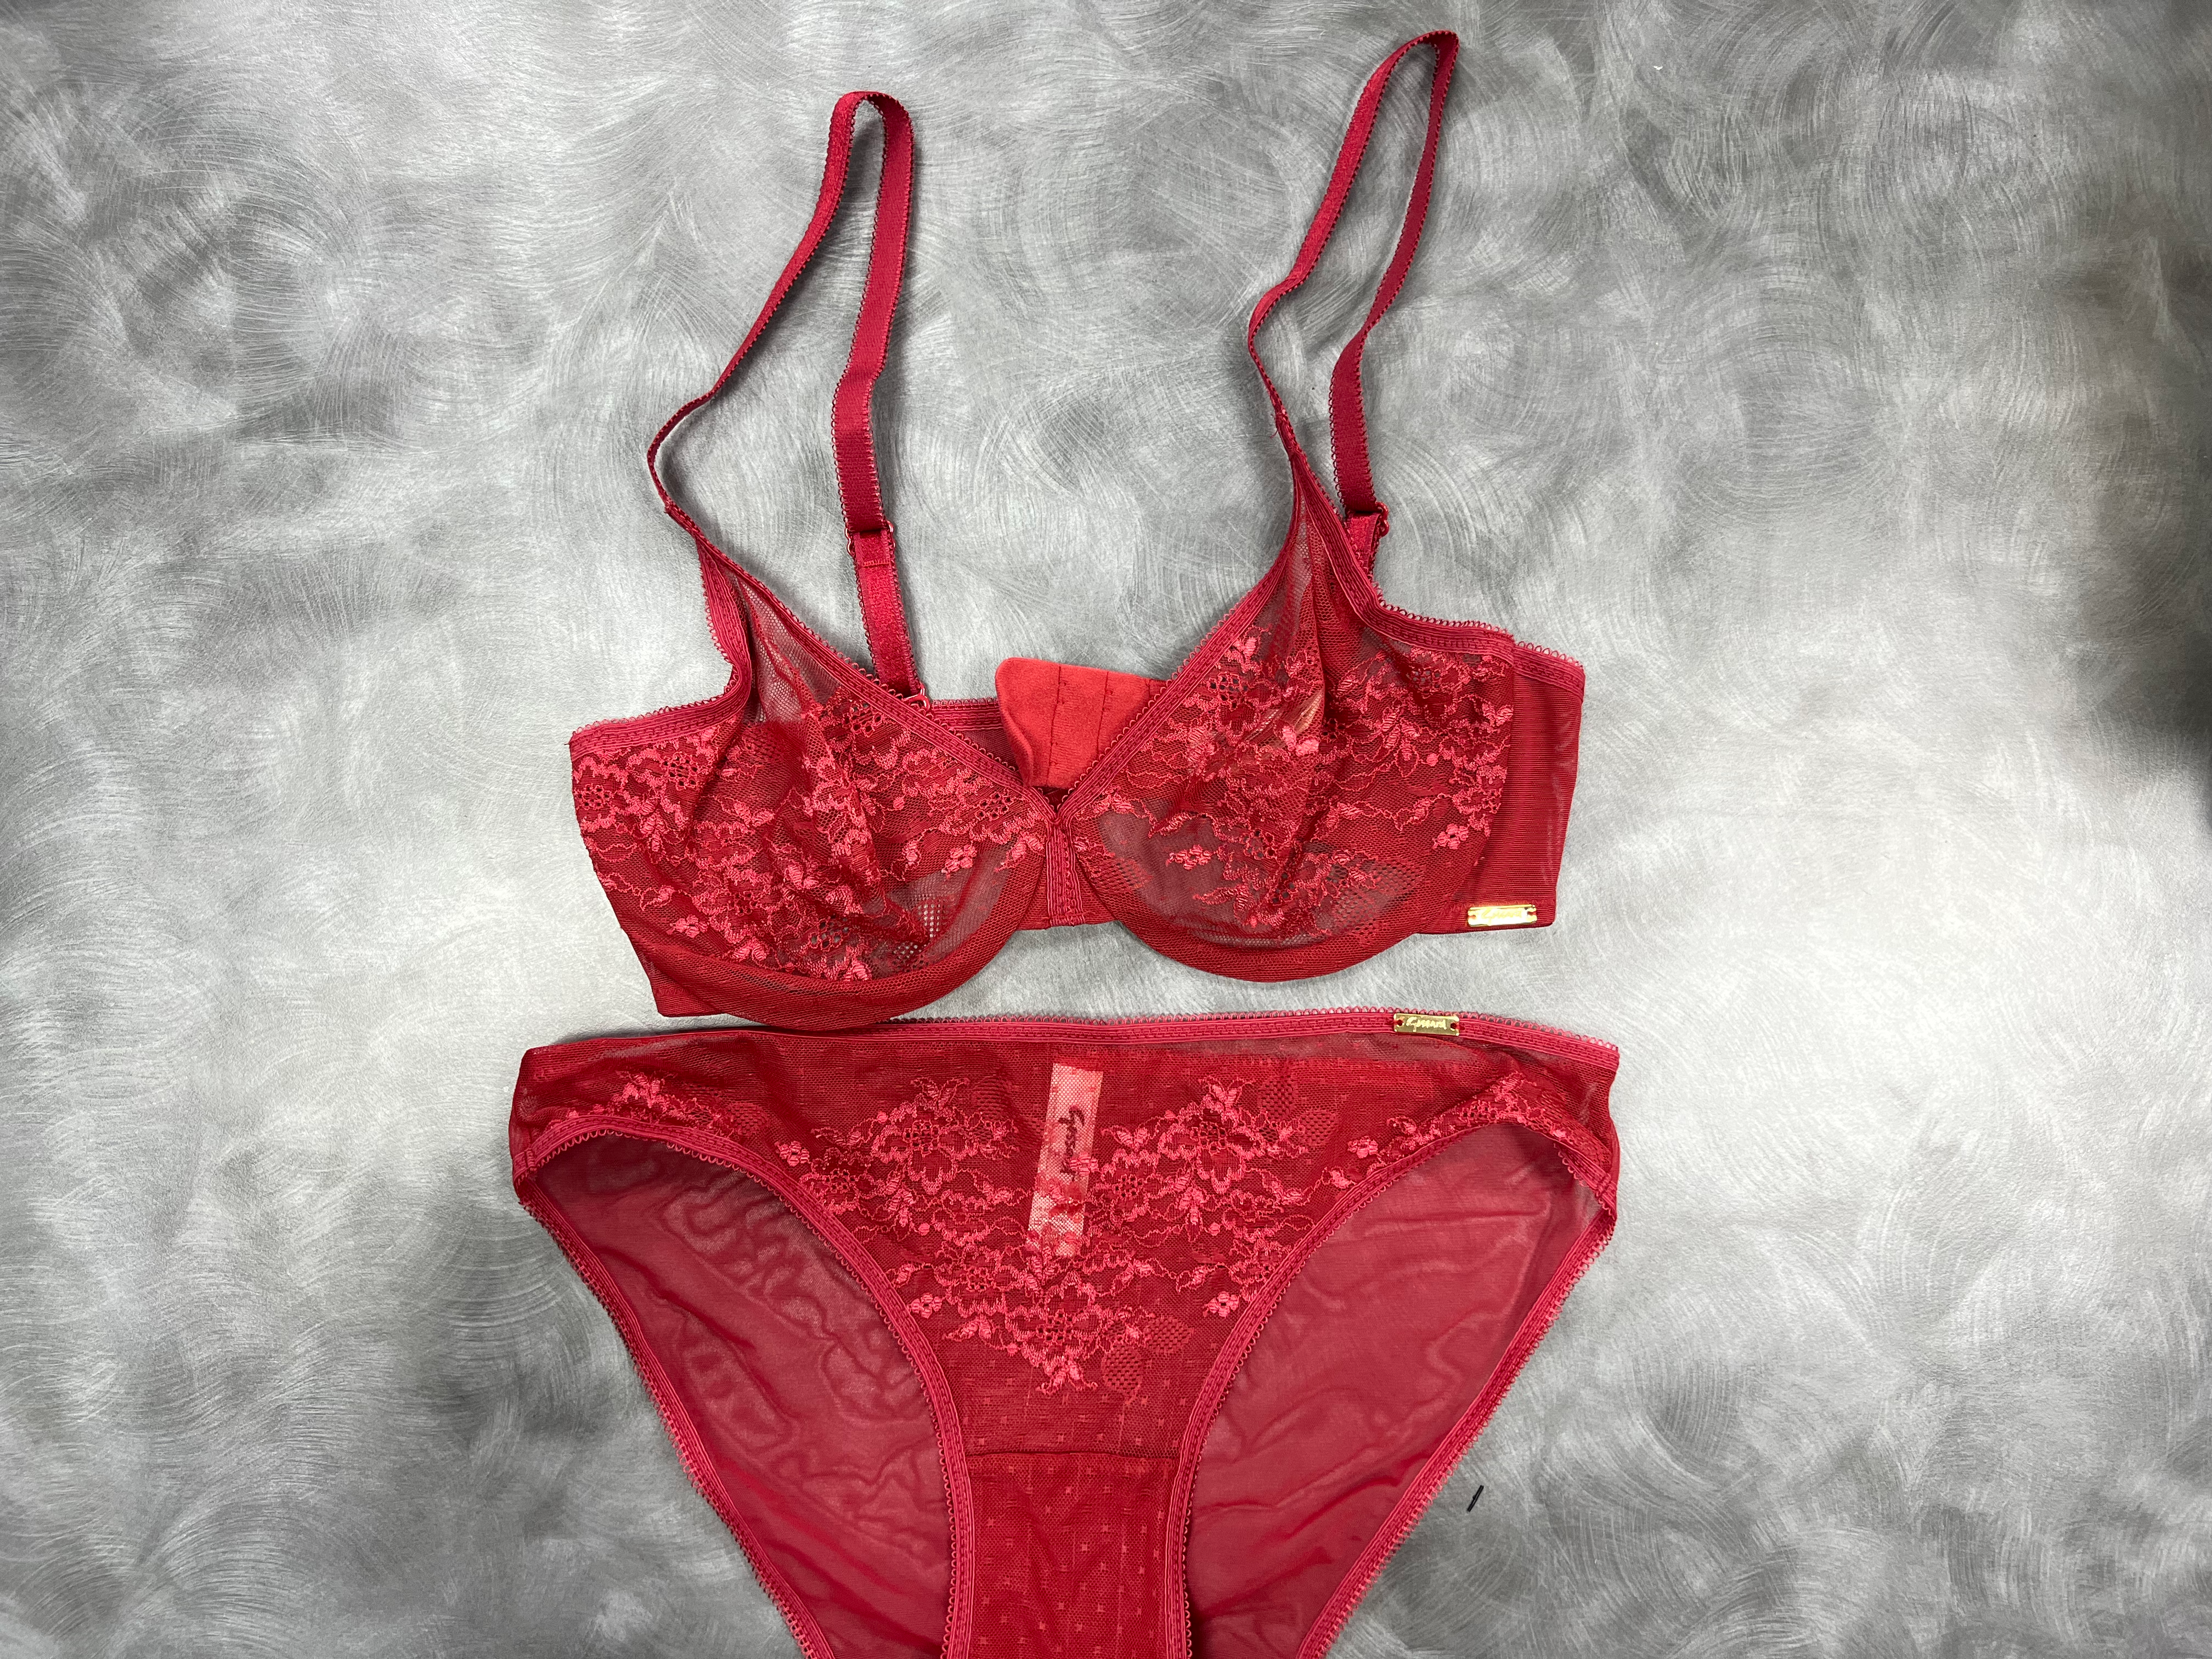 Gossard glossies lace moulded bra best red lingerie sets